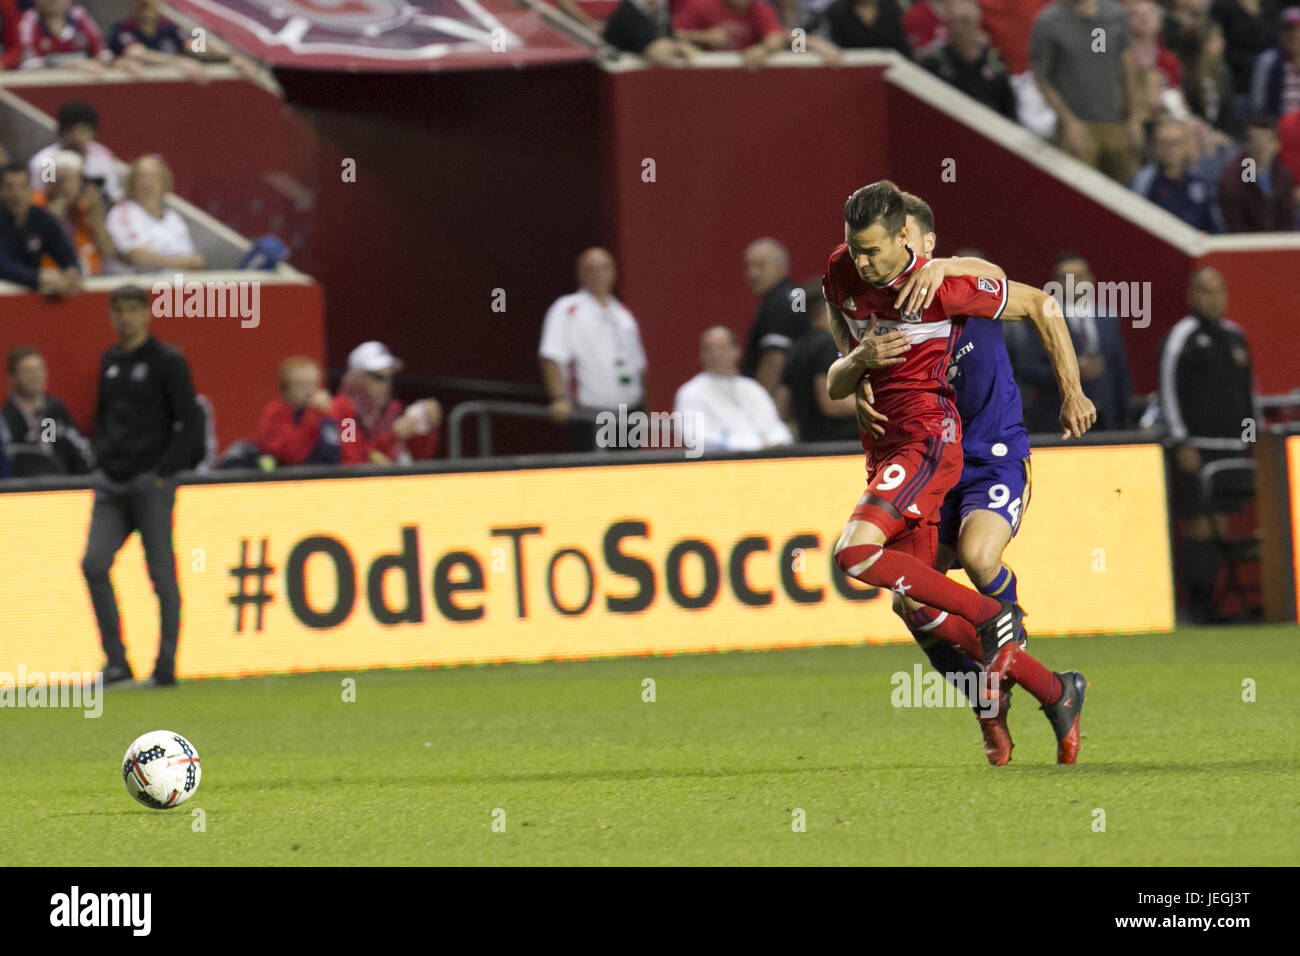 Bridgeview, Illinois, USA. 24th June, 2017. Luis Solignac (9) being pulled down by PC Giro (94) at Toyota Field in Bridgeview Illinois. A yellow card was issued to PC Giro and the Chicago Fire won, 4-0. Credit: Rick Majewski/ZUMA Wire/Alamy Live News Stock Photo